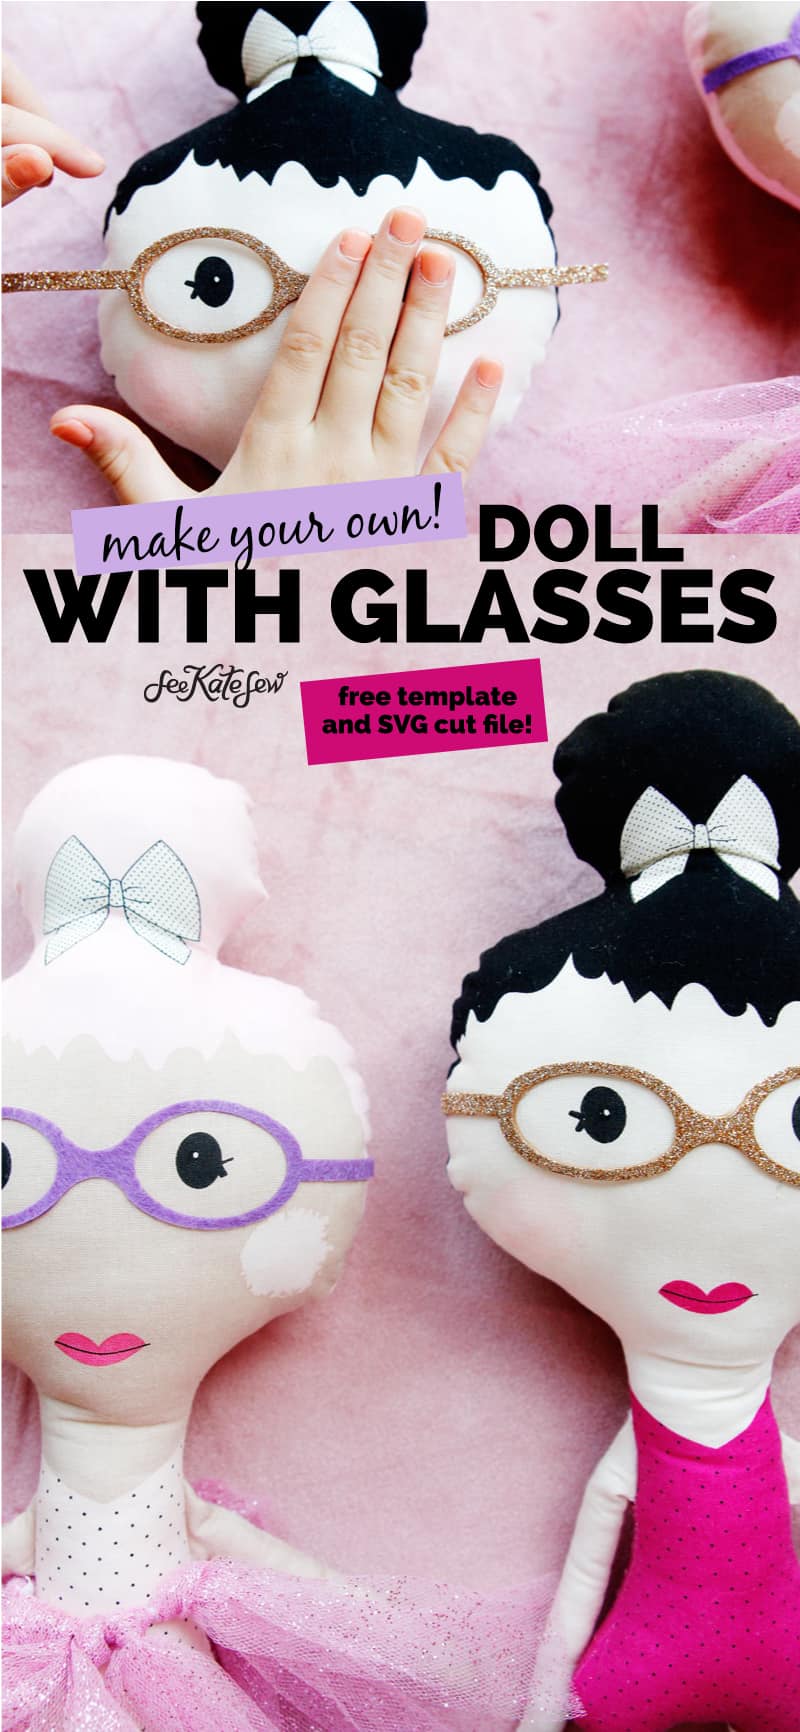 CUSTOM DOLL WITH GLASSES